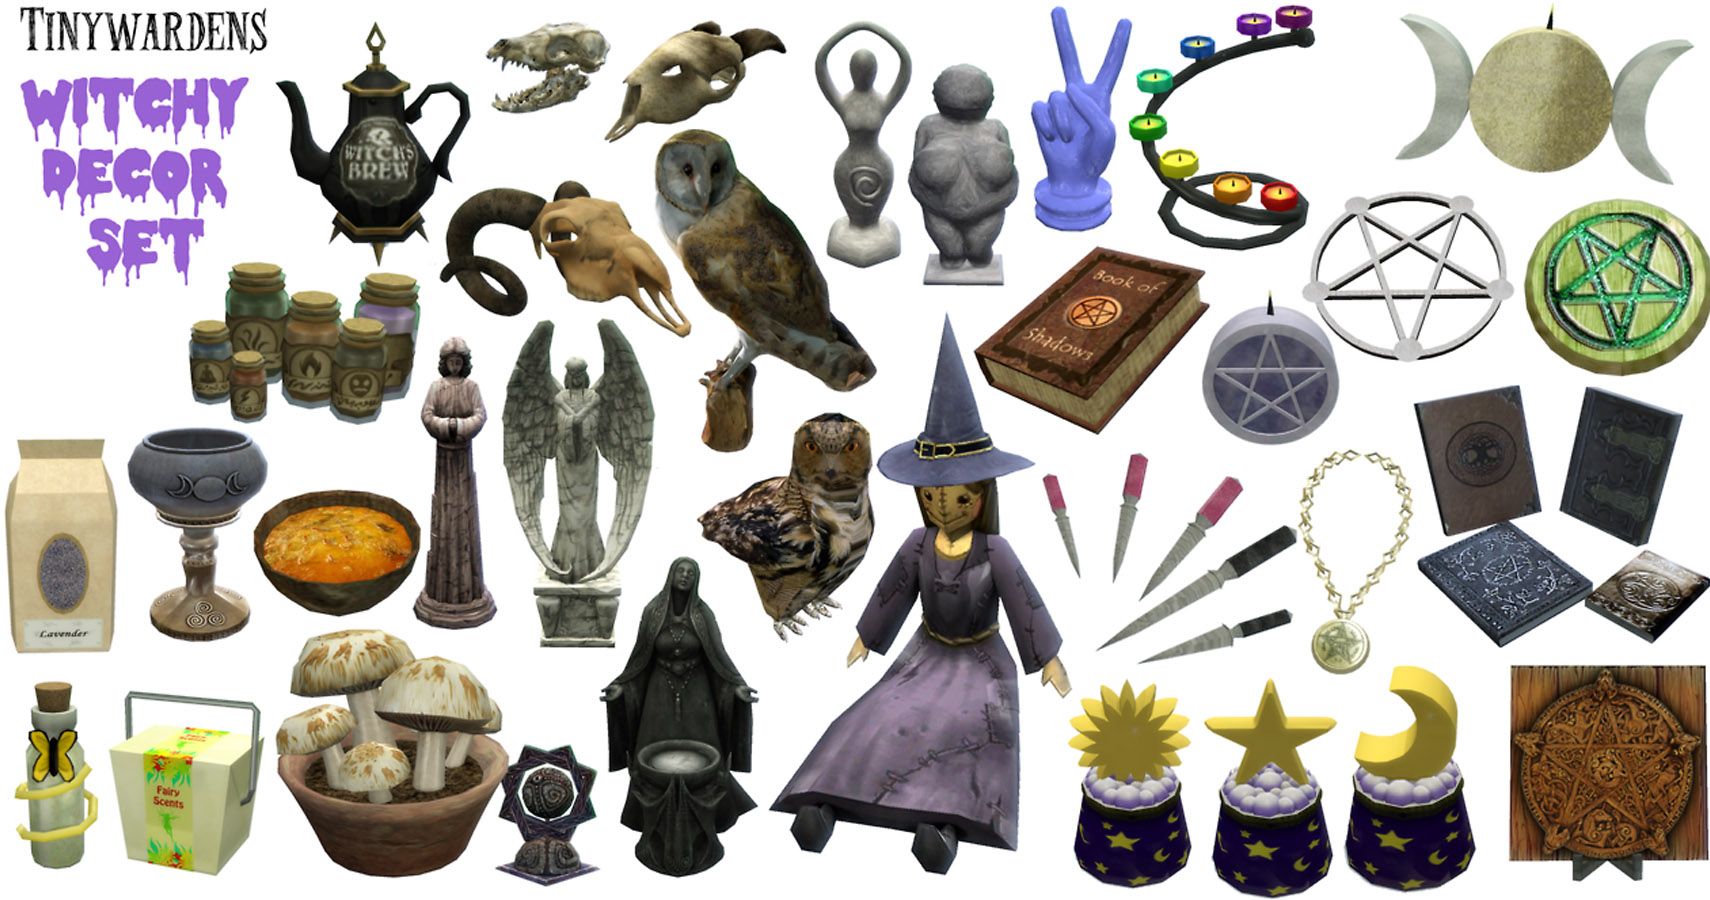 A large selection of witch themed objects including books, statues and potions.